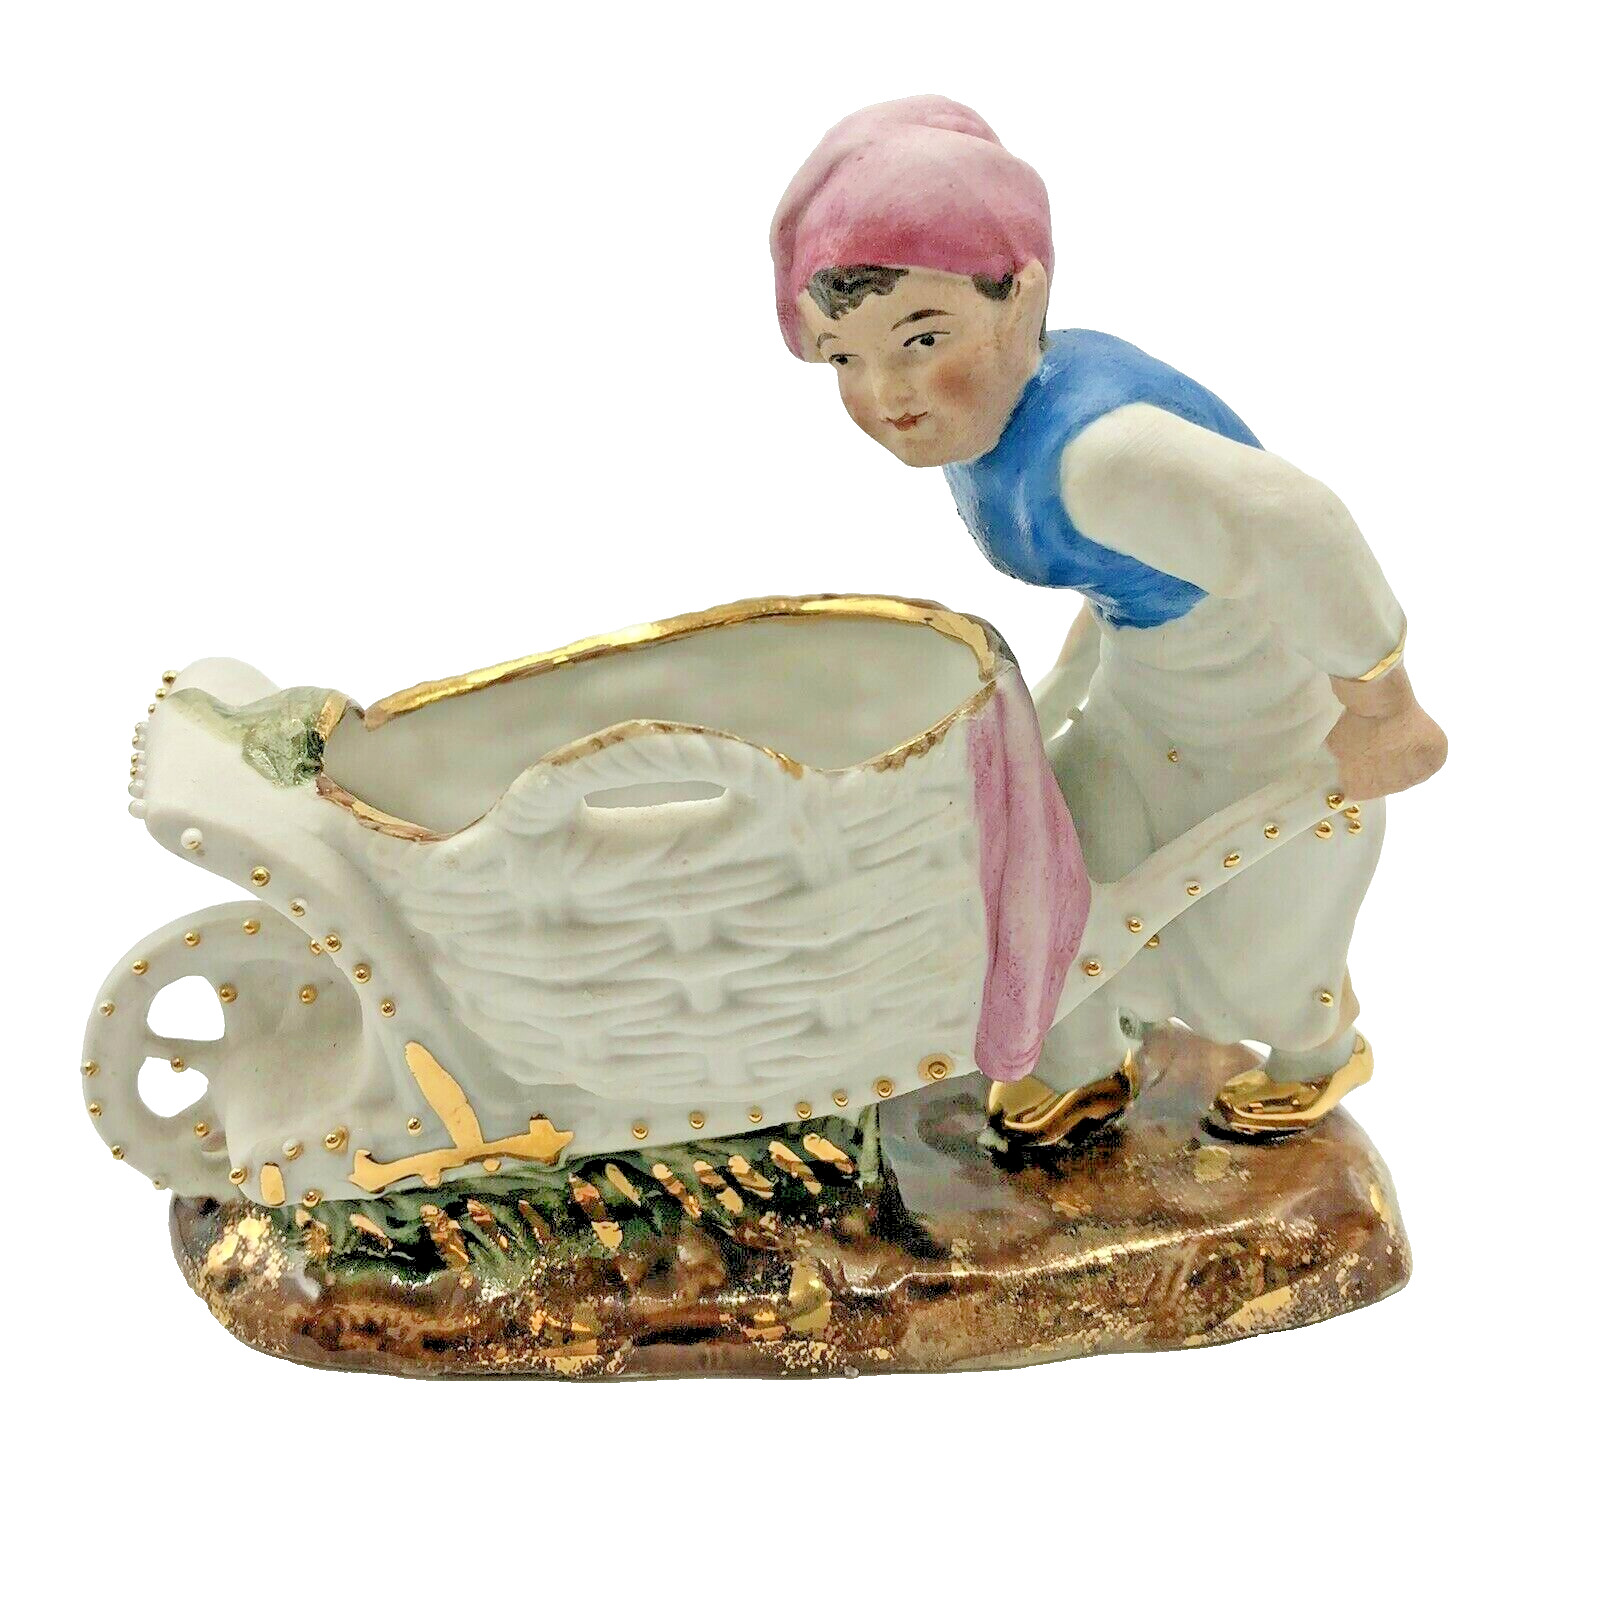 Vintage Boy Wheelbarrow Bisque Figurine Container Planter Germany Hand Painted 